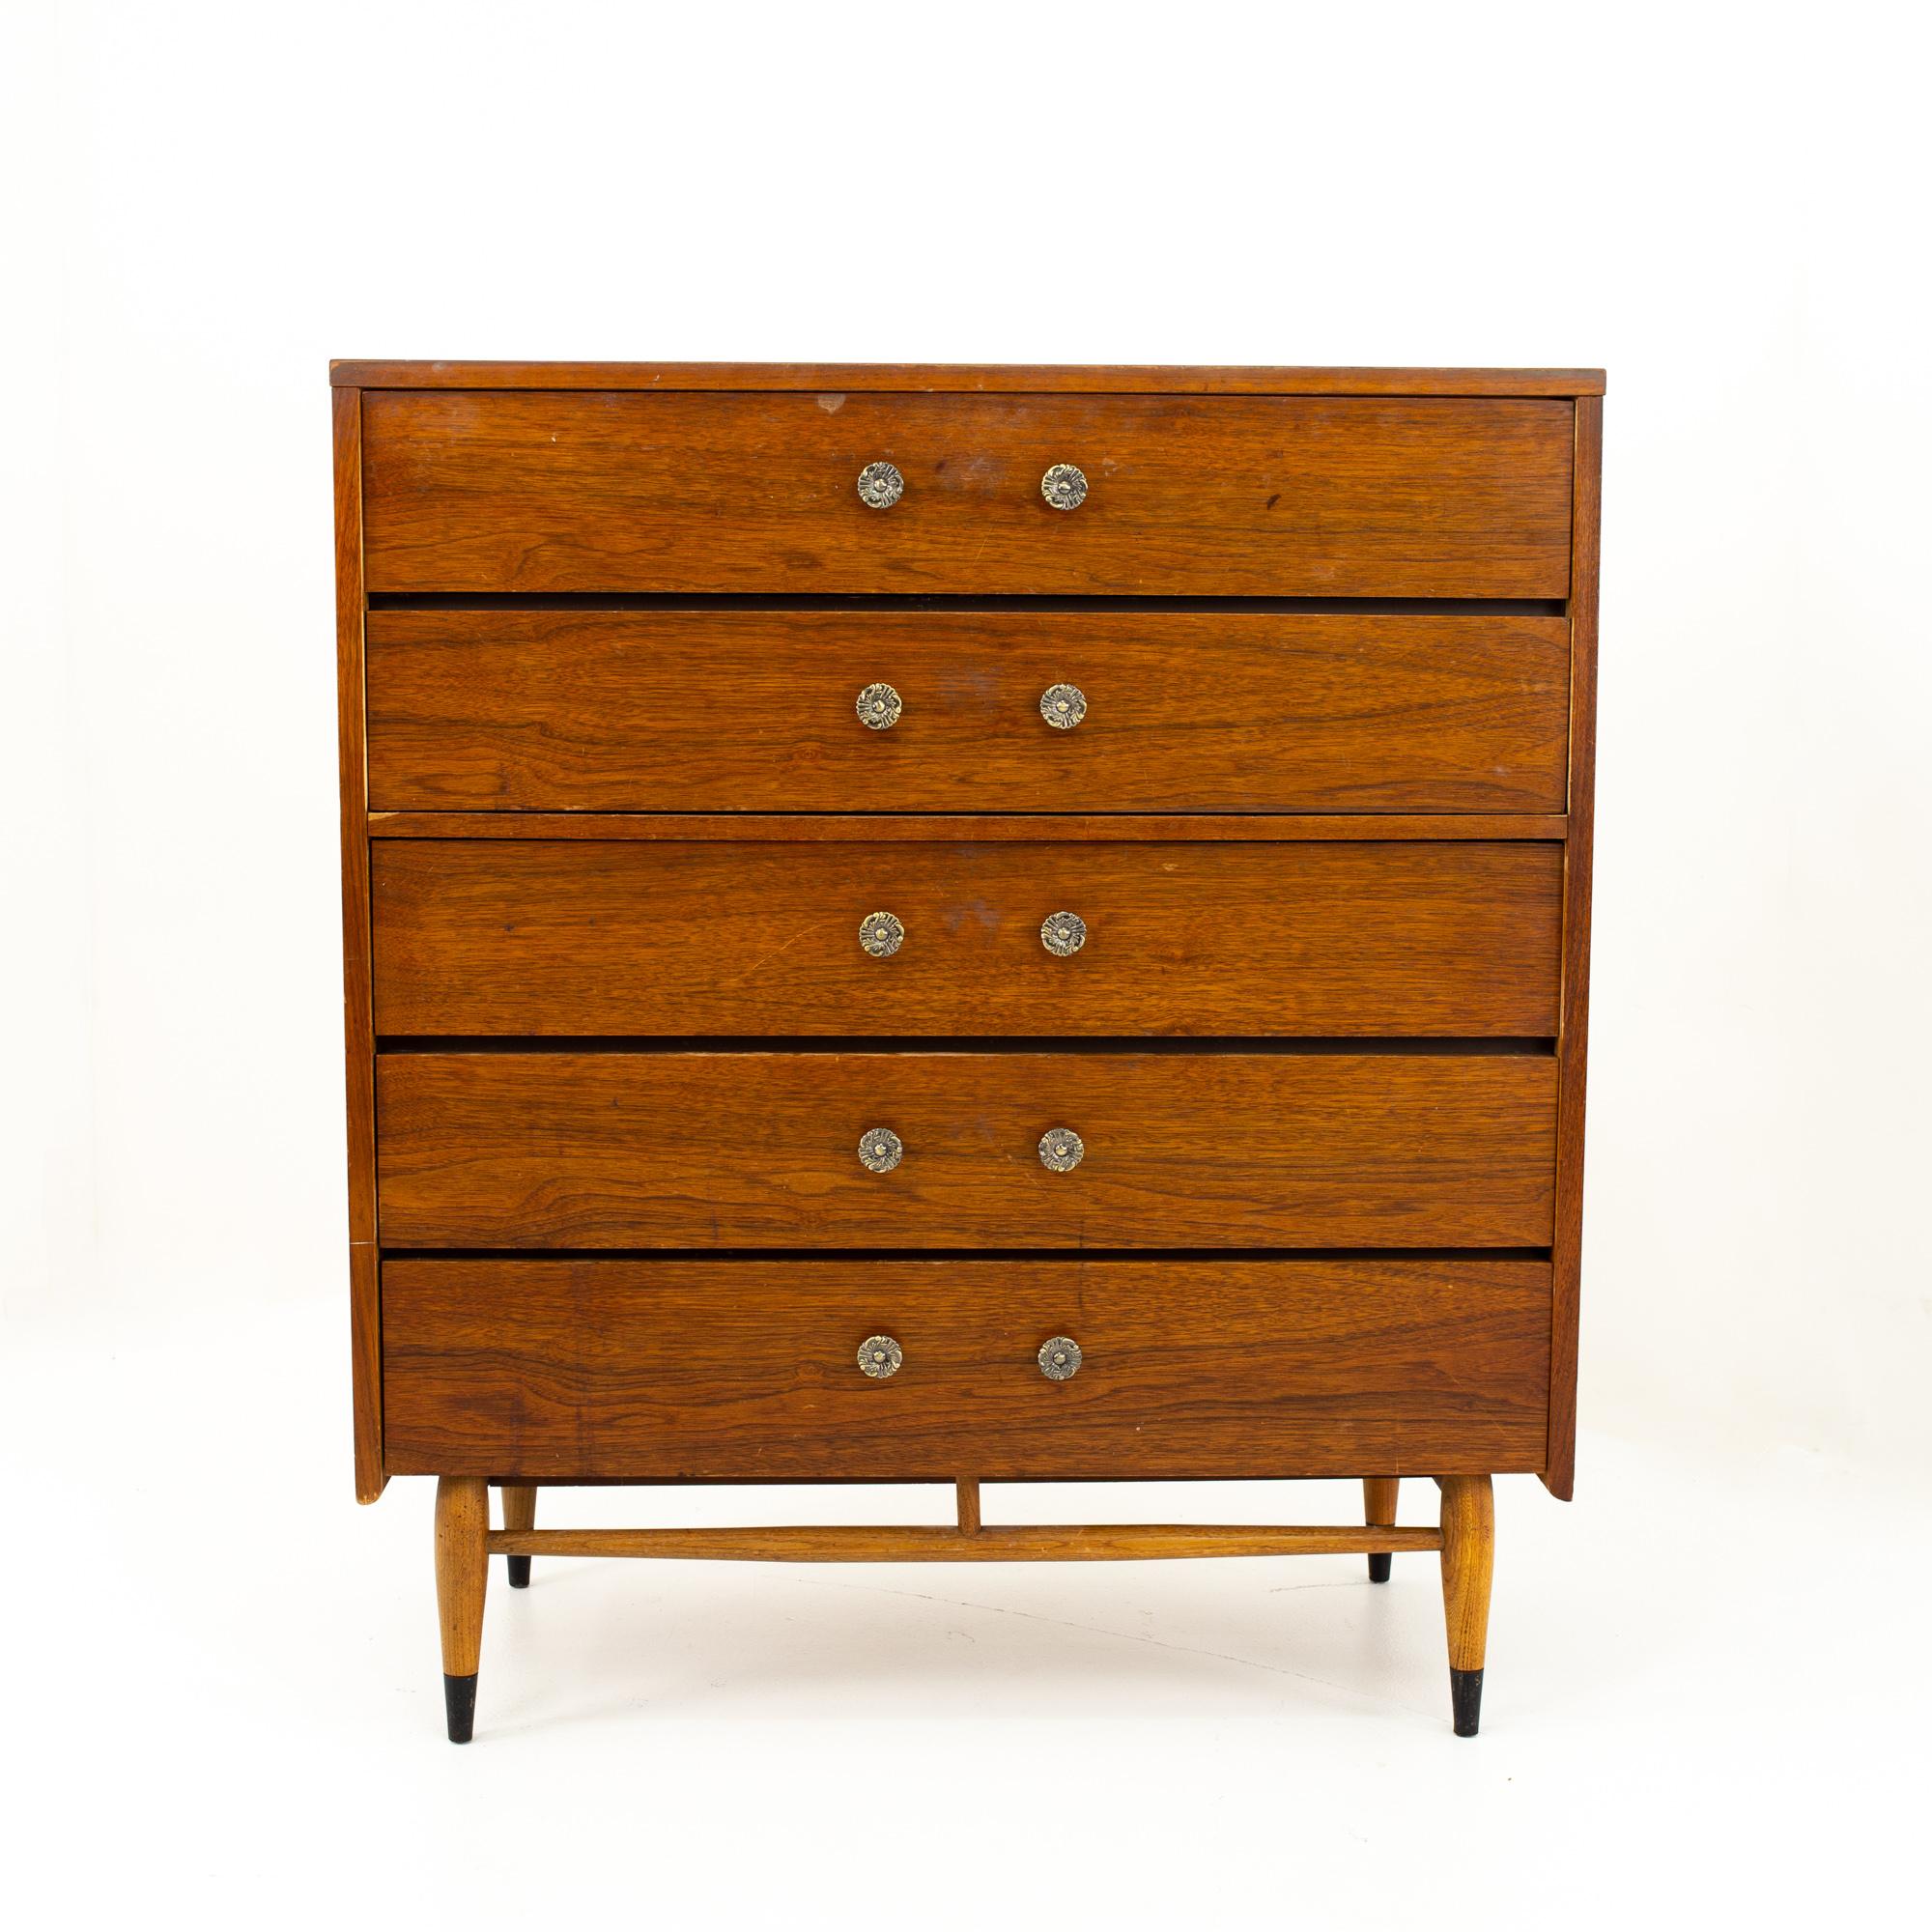 Lane Acclaim Mid Century walnut 5-drawer highboy dresser
Dresser measures: 38 wide x 18 deep x 43 high

This price includes getting this piece in what we call Restored Vintage Condition. That means the piece is permanently fixed upon purchase so